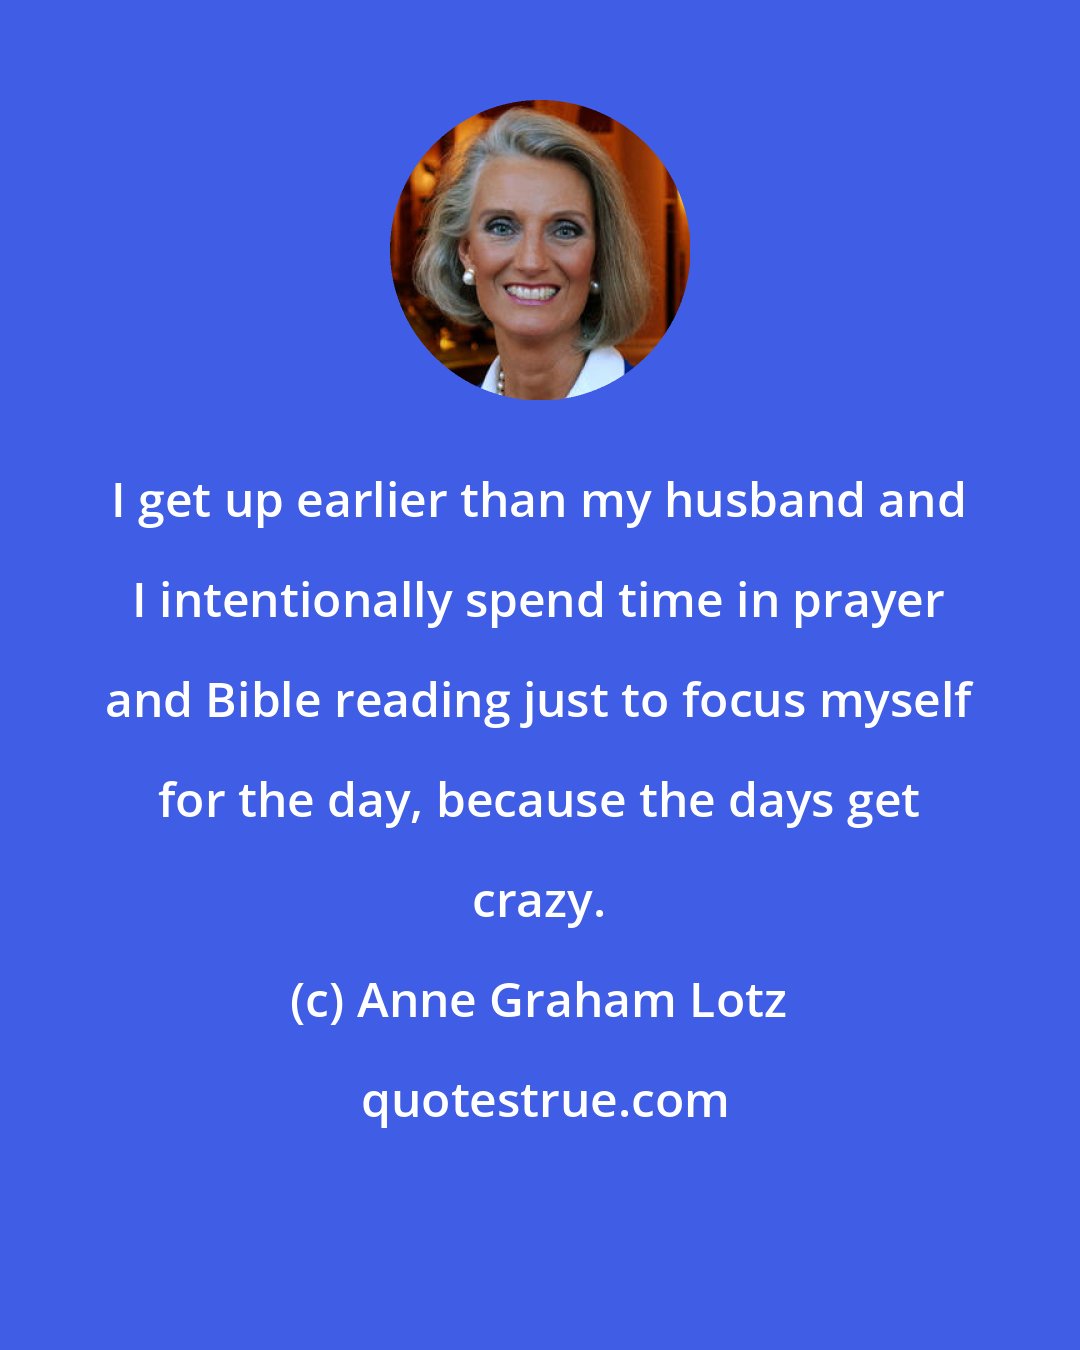 Anne Graham Lotz: I get up earlier than my husband and I intentionally spend time in prayer and Bible reading just to focus myself for the day, because the days get crazy.